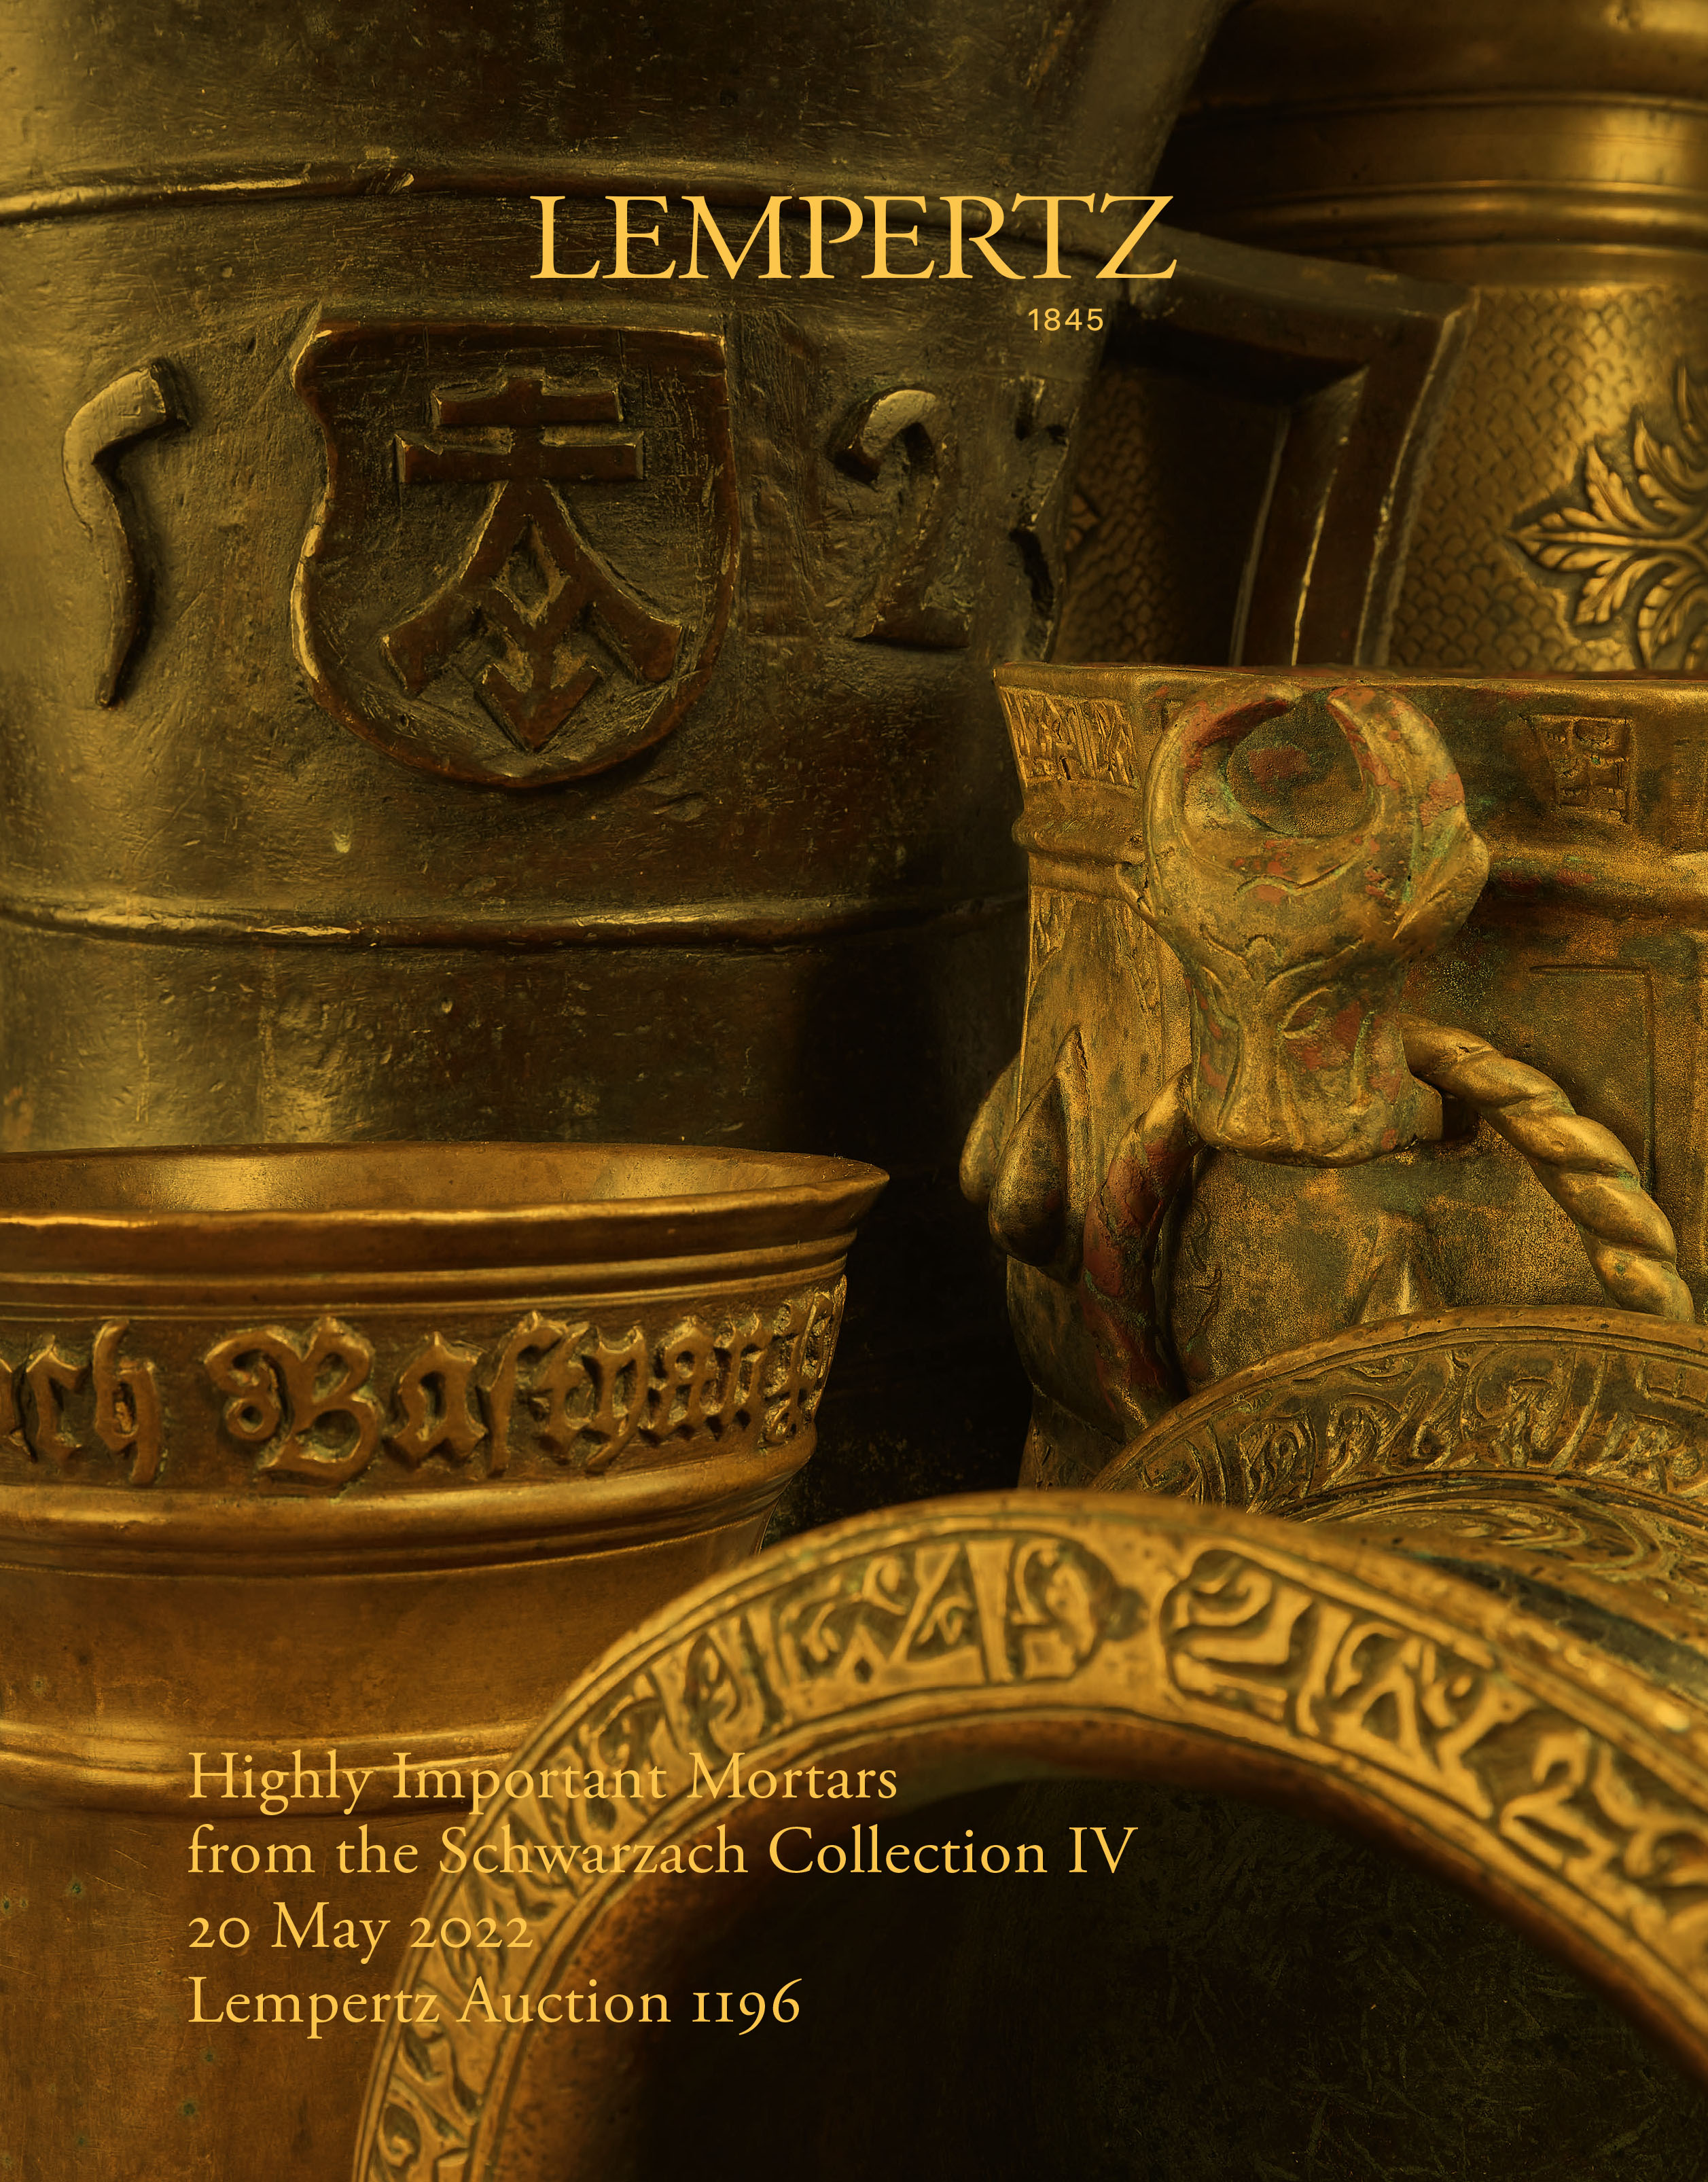 Auction house - Highly Important Mortars from the Schwarzach Collection Part IV. - Auction Catalogue 1196 – Auction House Lempertz